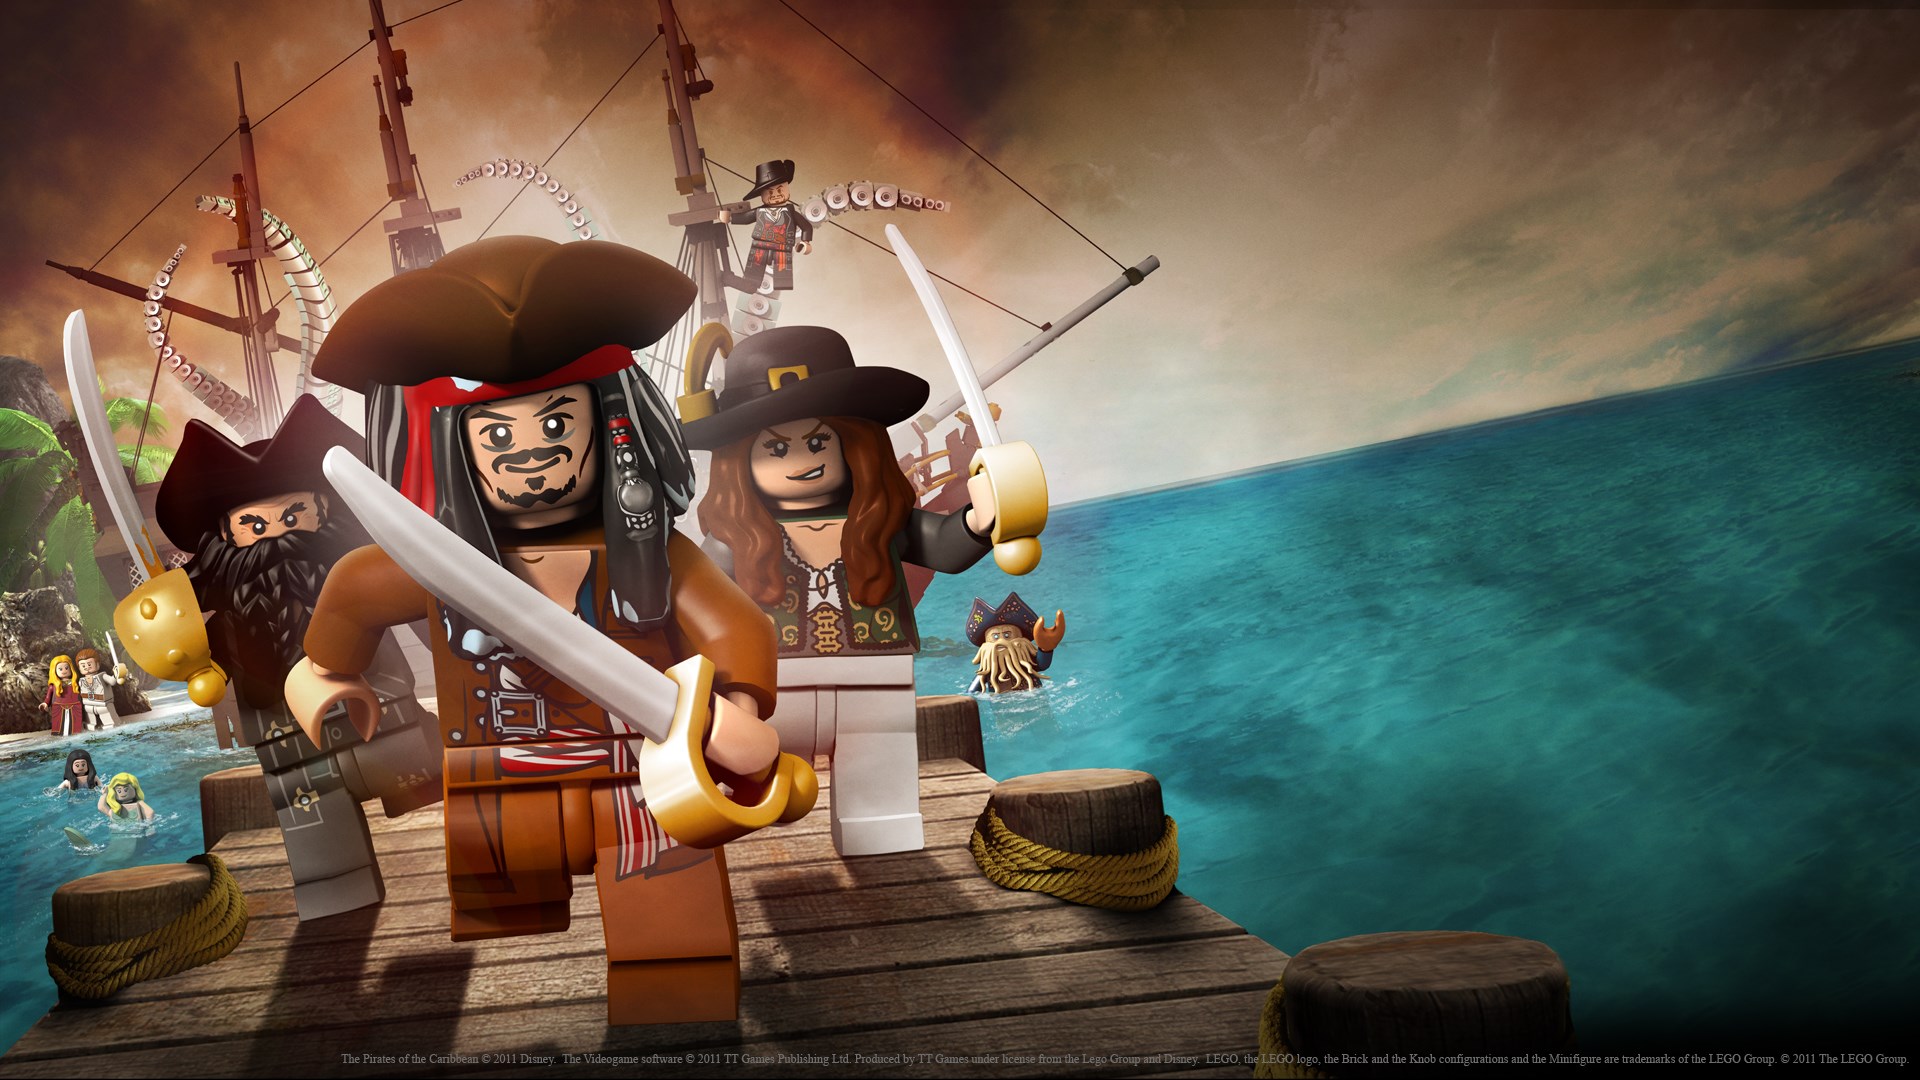 Buy LEGO Pirates of the Caribbean: The Video Game - Microsoft Store en-SA